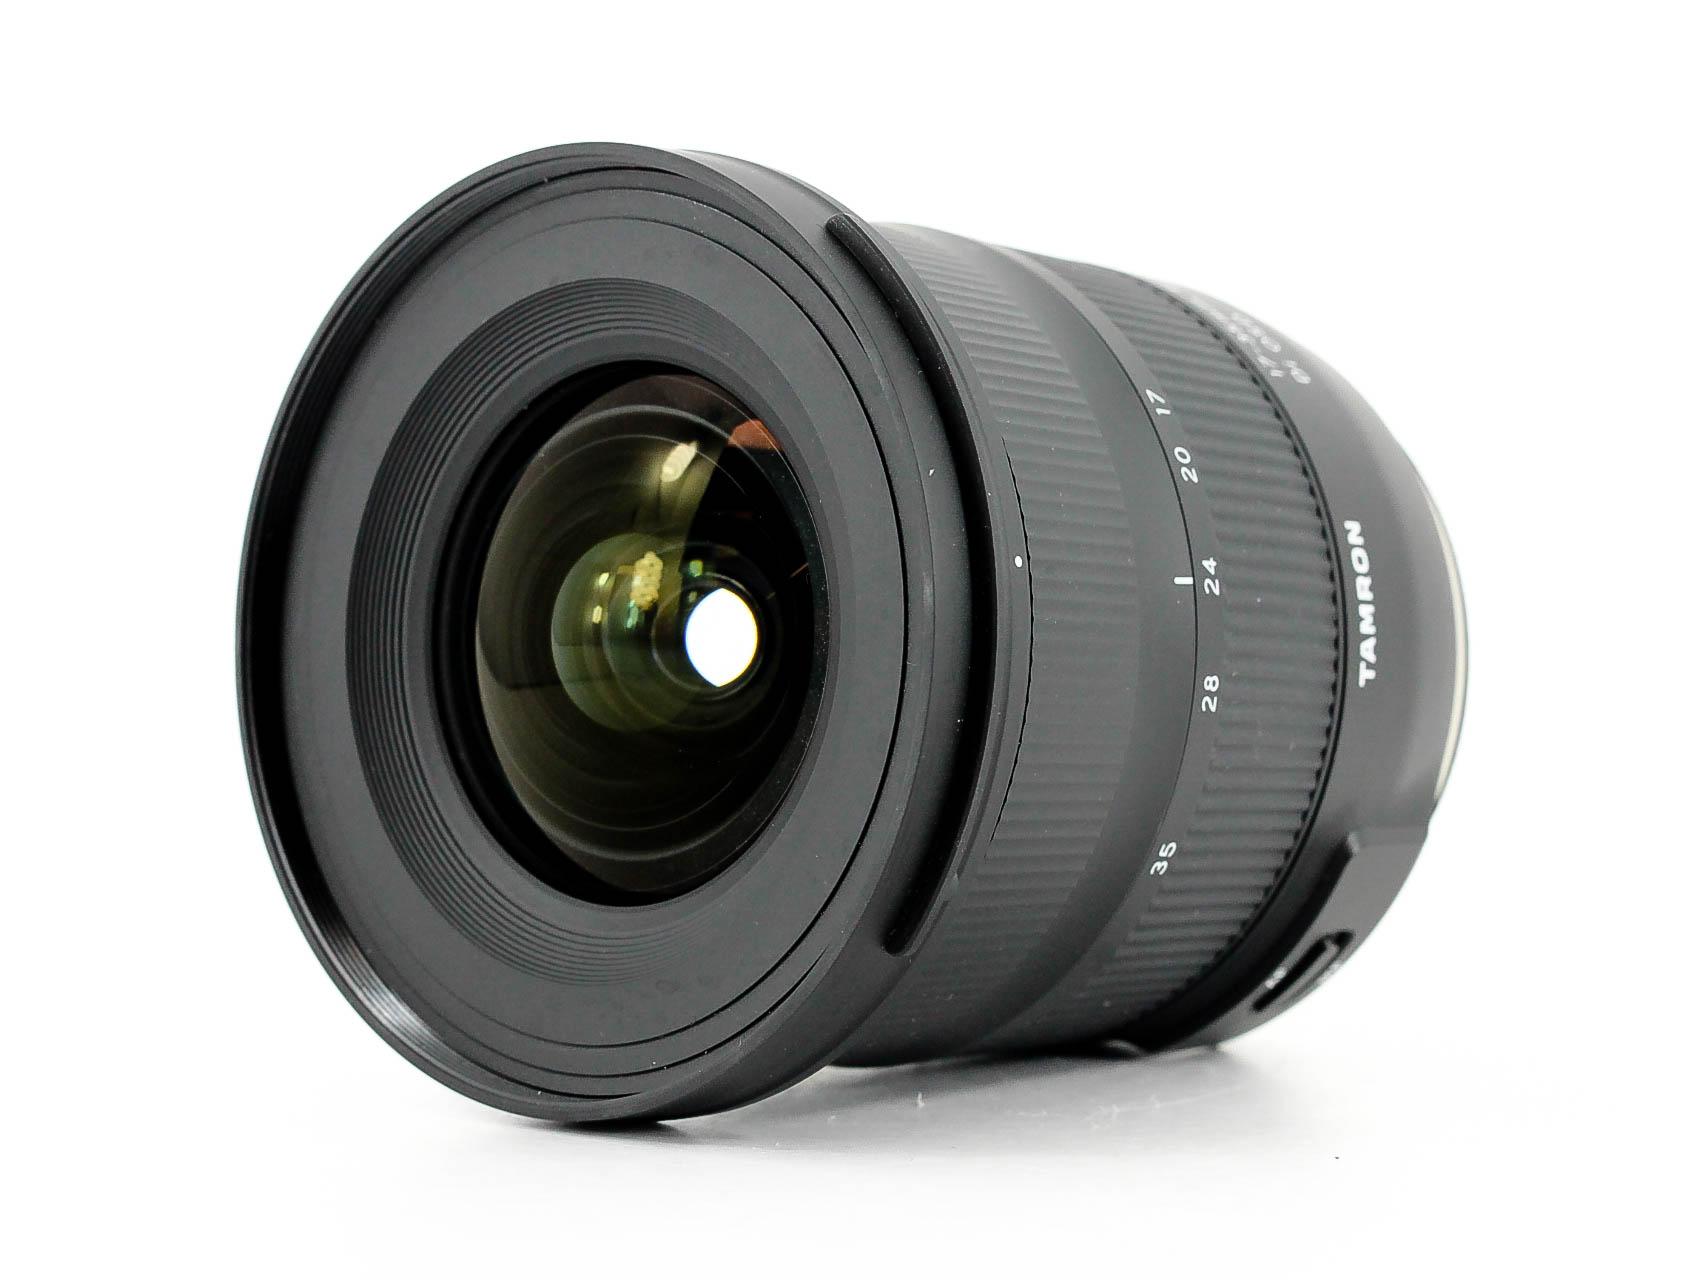 Tamron 17-35mm F/2.8-4 Di OSD Canon EF Fit Lens - Lenses and Cameras